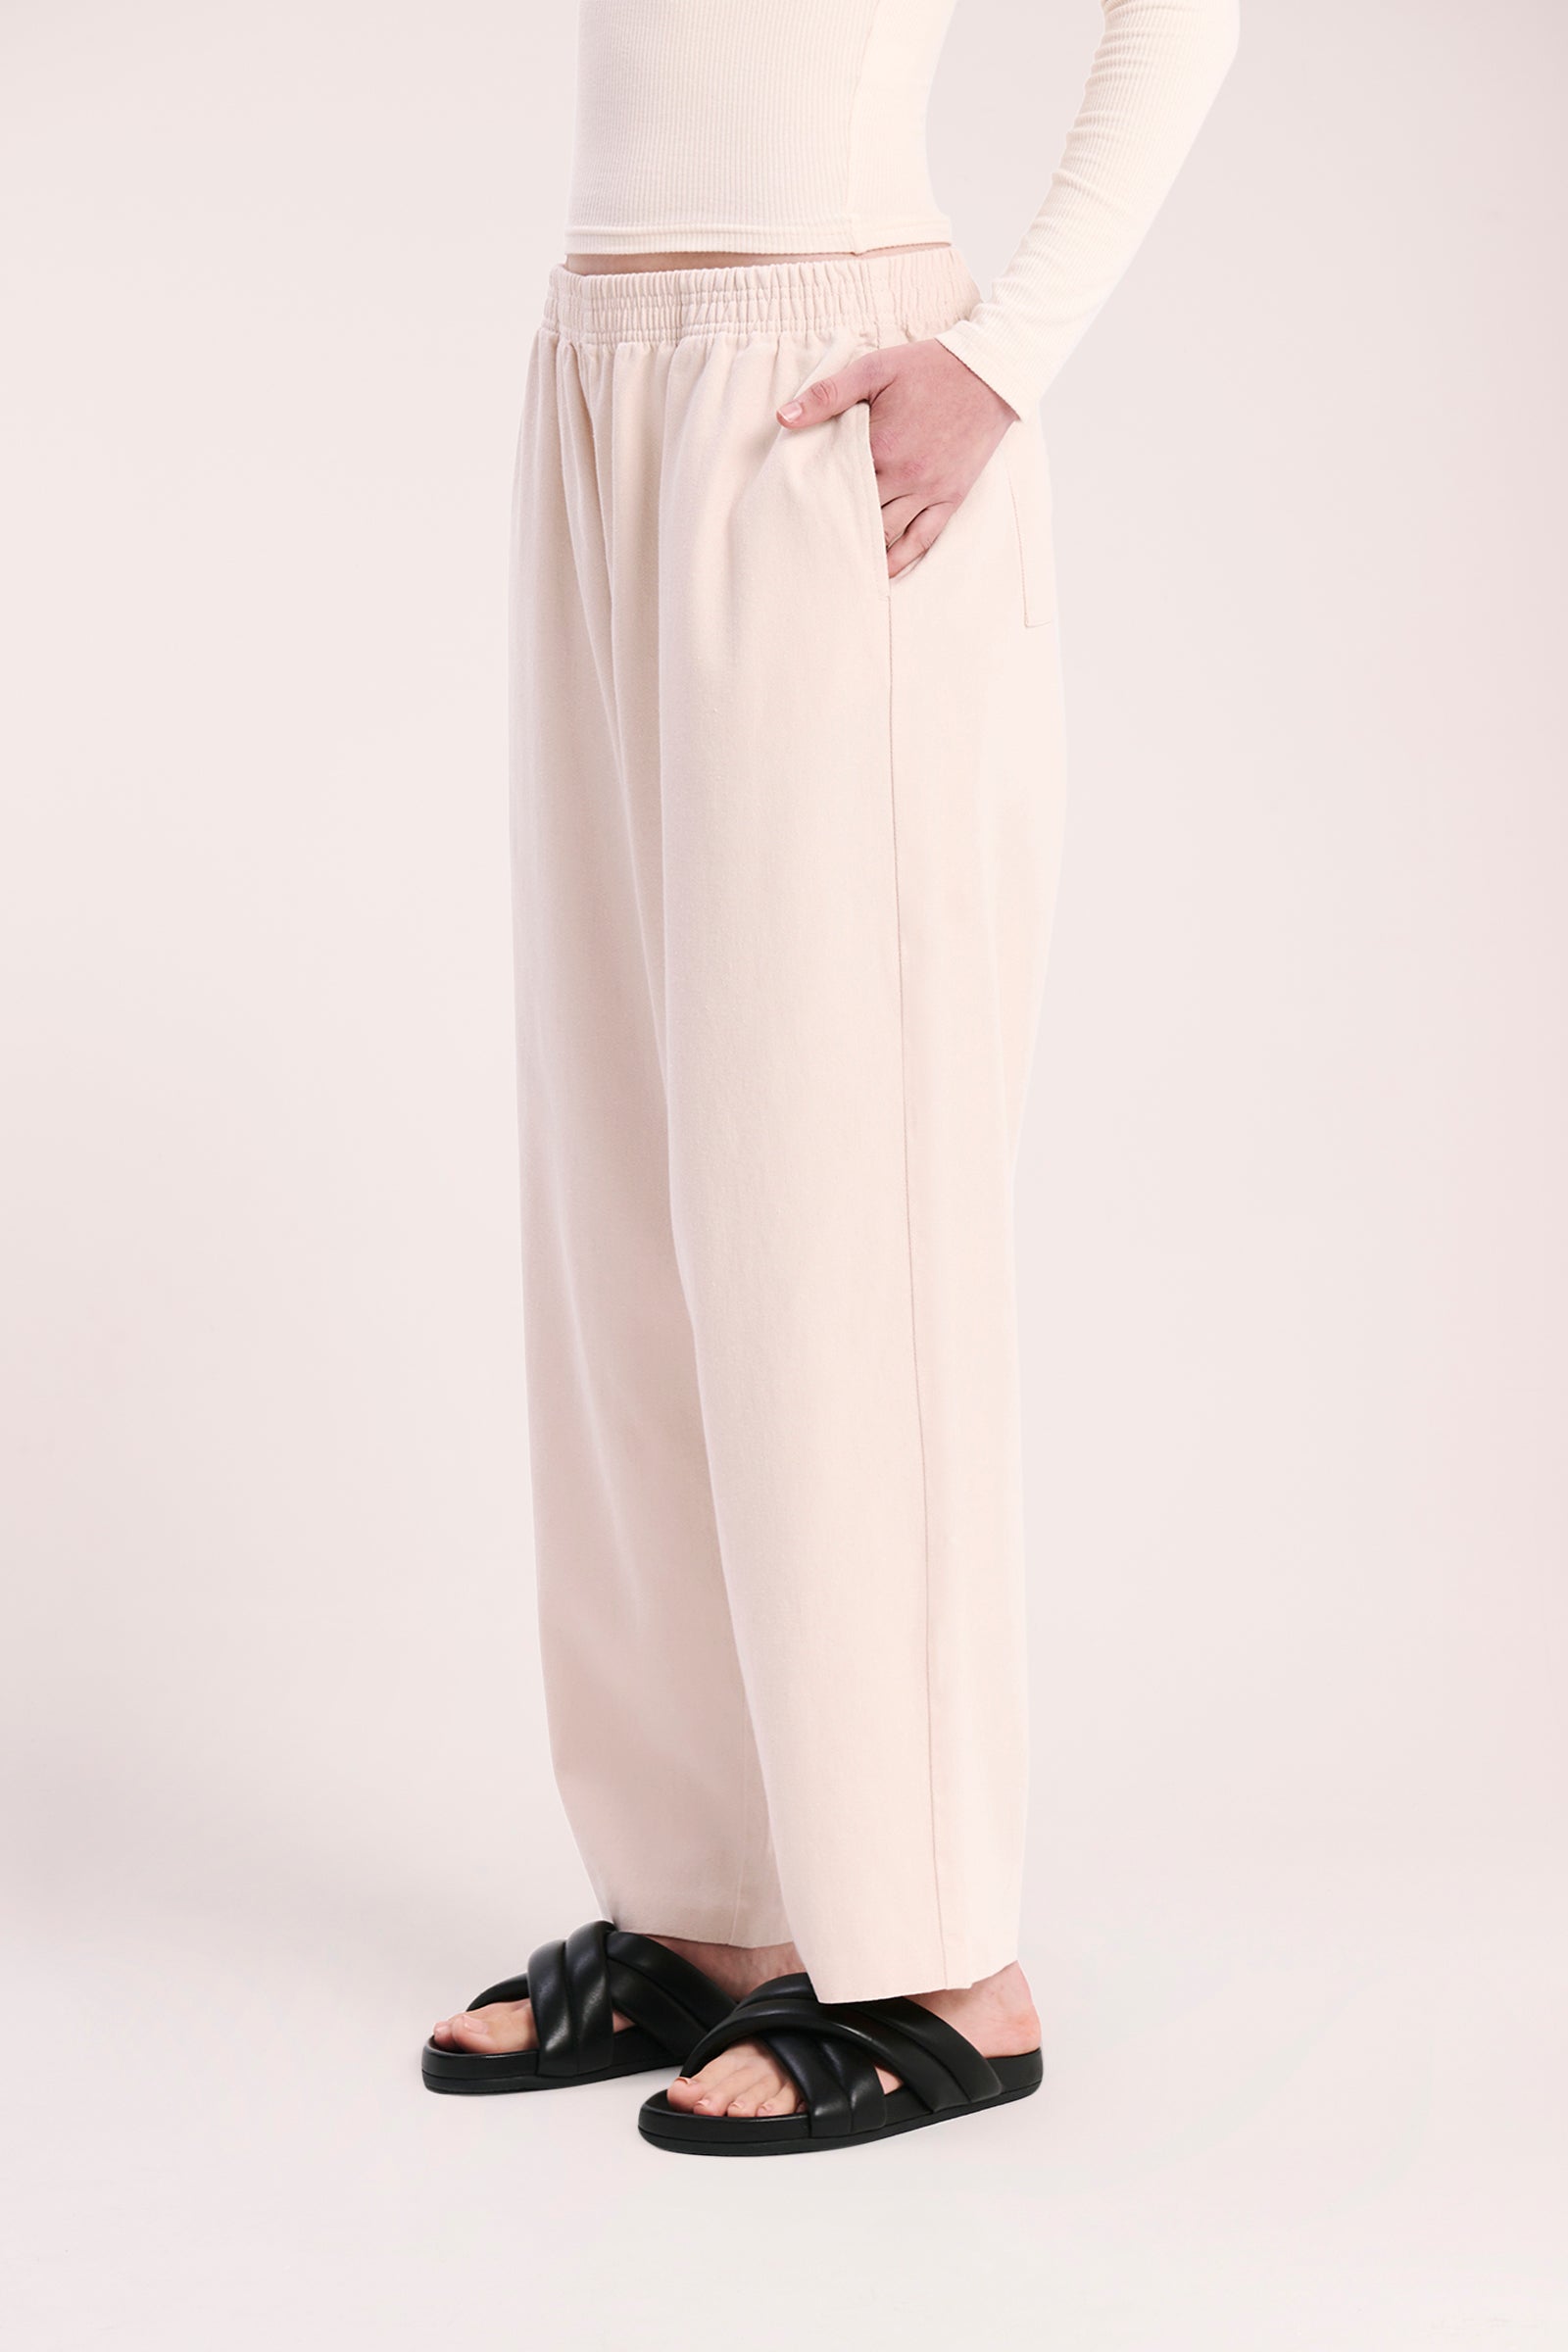 Nude Lucy Brookes Pant in White Cloud